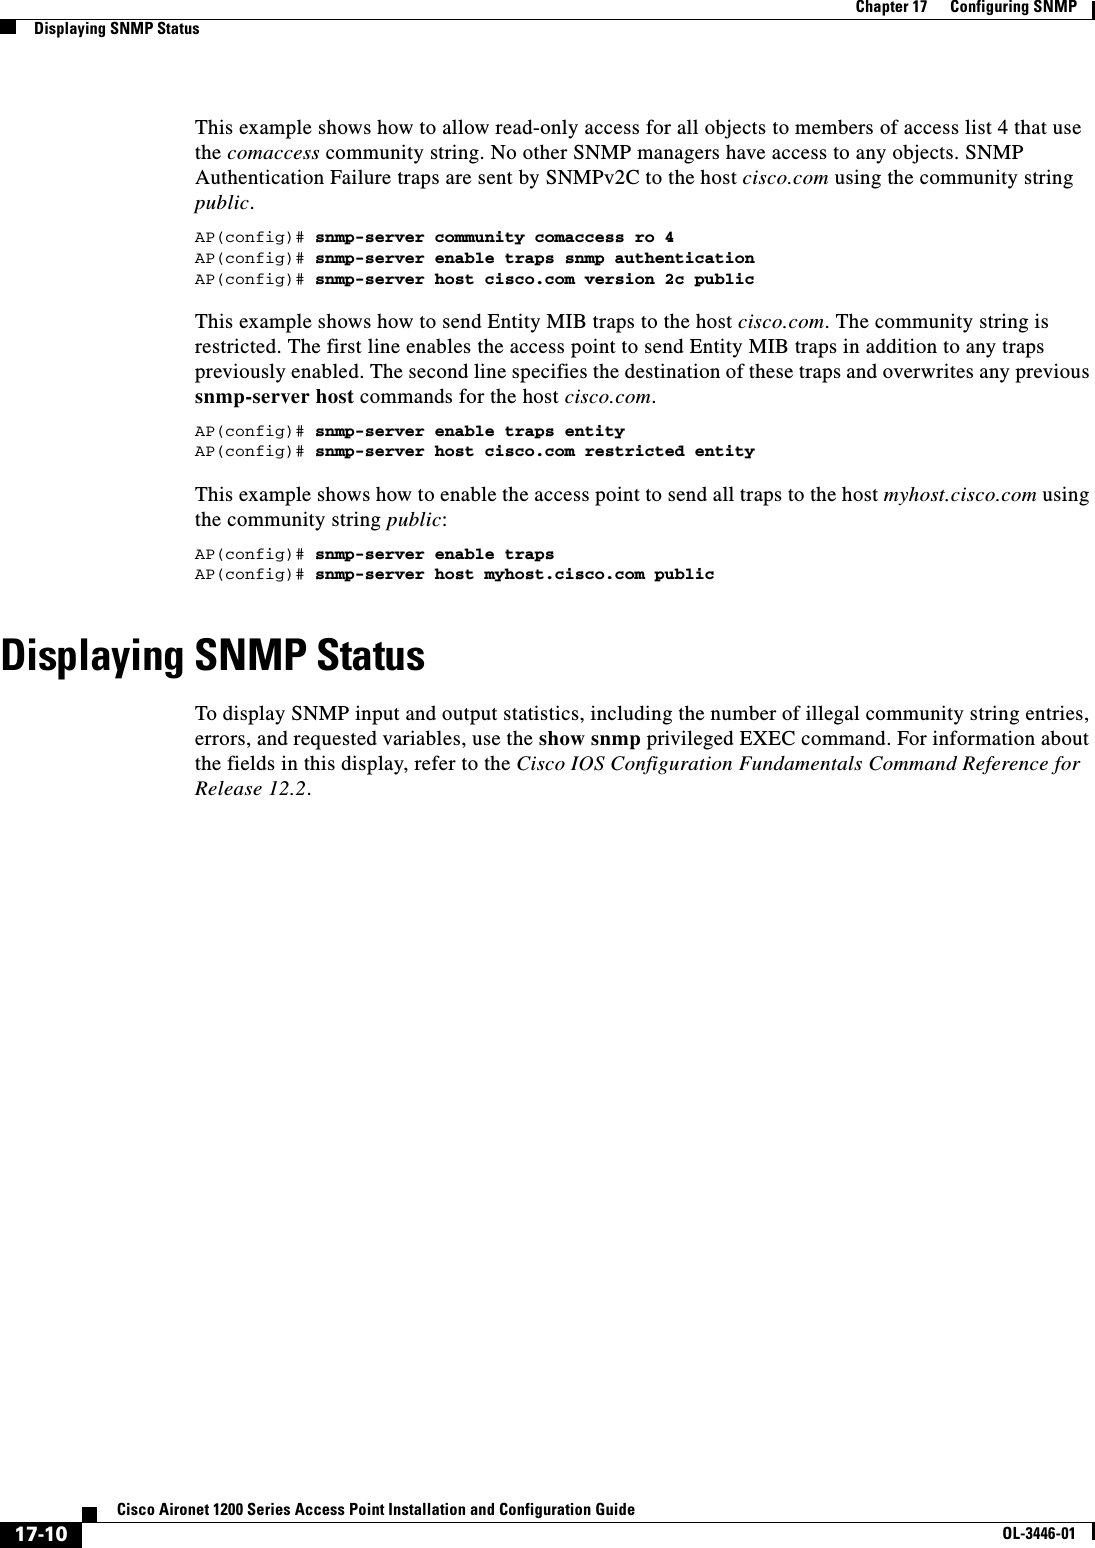 17-10Cisco Aironet 1200 Series Access Point Installation and Configuration GuideOL-3446-01Chapter 17      Configuring SNMPDisplaying SNMP StatusThis example shows how to allow read-only access for all objects to members of access list 4 that use the comaccess community string. No other SNMP managers have access to any objects. SNMP Authentication Failure traps are sent by SNMPv2C to the host cisco.com using the community string public.AP(config)# snmp-server community comaccess ro 4AP(config)# snmp-server enable traps snmp authenticationAP(config)# snmp-server host cisco.com version 2c publicThis example shows how to send Entity MIB traps to the host cisco.com. The community string is restricted. The first line enables the access point to send Entity MIB traps in addition to any traps previously enabled. The second line specifies the destination of these traps and overwrites any previous snmp-server host commands for the host cisco.com.AP(config)# snmp-server enable traps entityAP(config)# snmp-server host cisco.com restricted entityThis example shows how to enable the access point to send all traps to the host myhost.cisco.com using the community string public:AP(config)# snmp-server enable trapsAP(config)# snmp-server host myhost.cisco.com publicDisplaying SNMP StatusTo display SNMP input and output statistics, including the number of illegal community string entries, errors, and requested variables, use the show snmp privileged EXEC command. For information about the fields in this display, refer to the Cisco IOS Configuration Fundamentals Command Reference for Release 12.2.